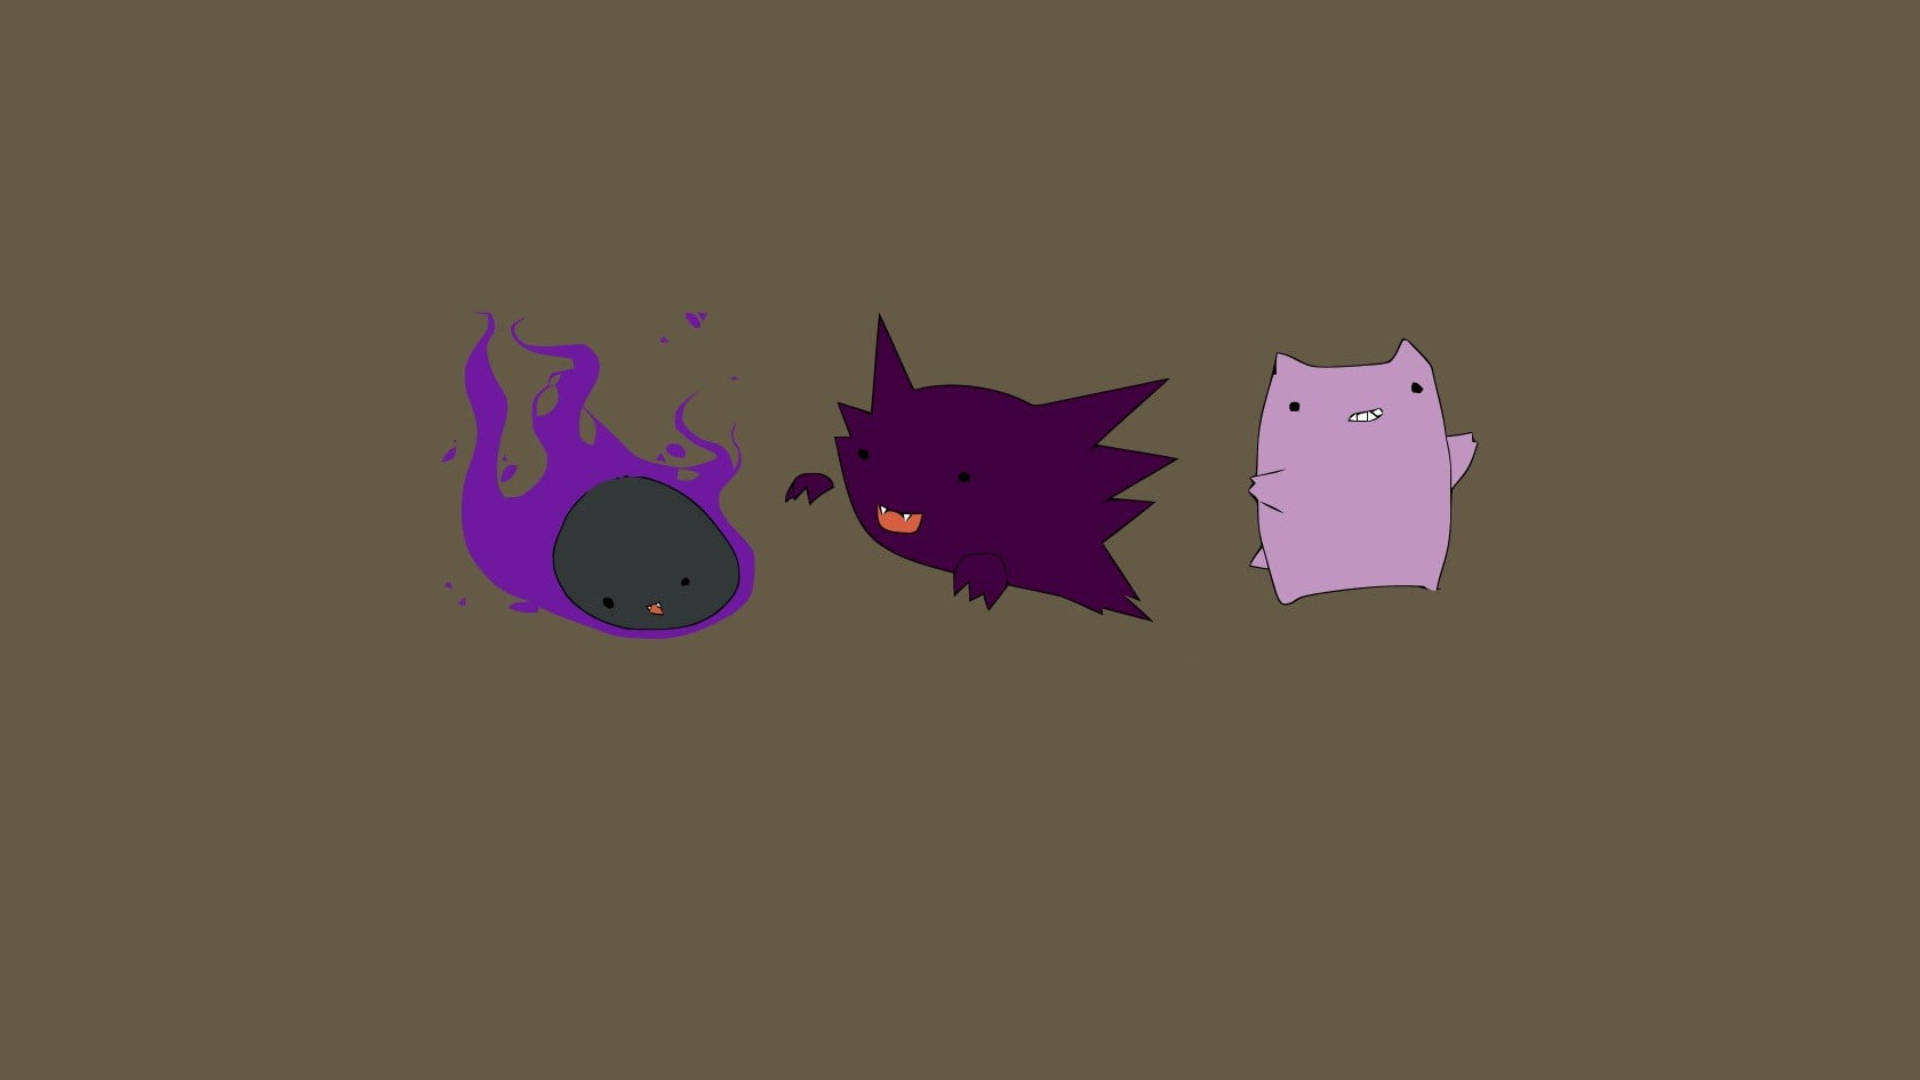 Gengar 1920X1080 Wallpaper and Background Image